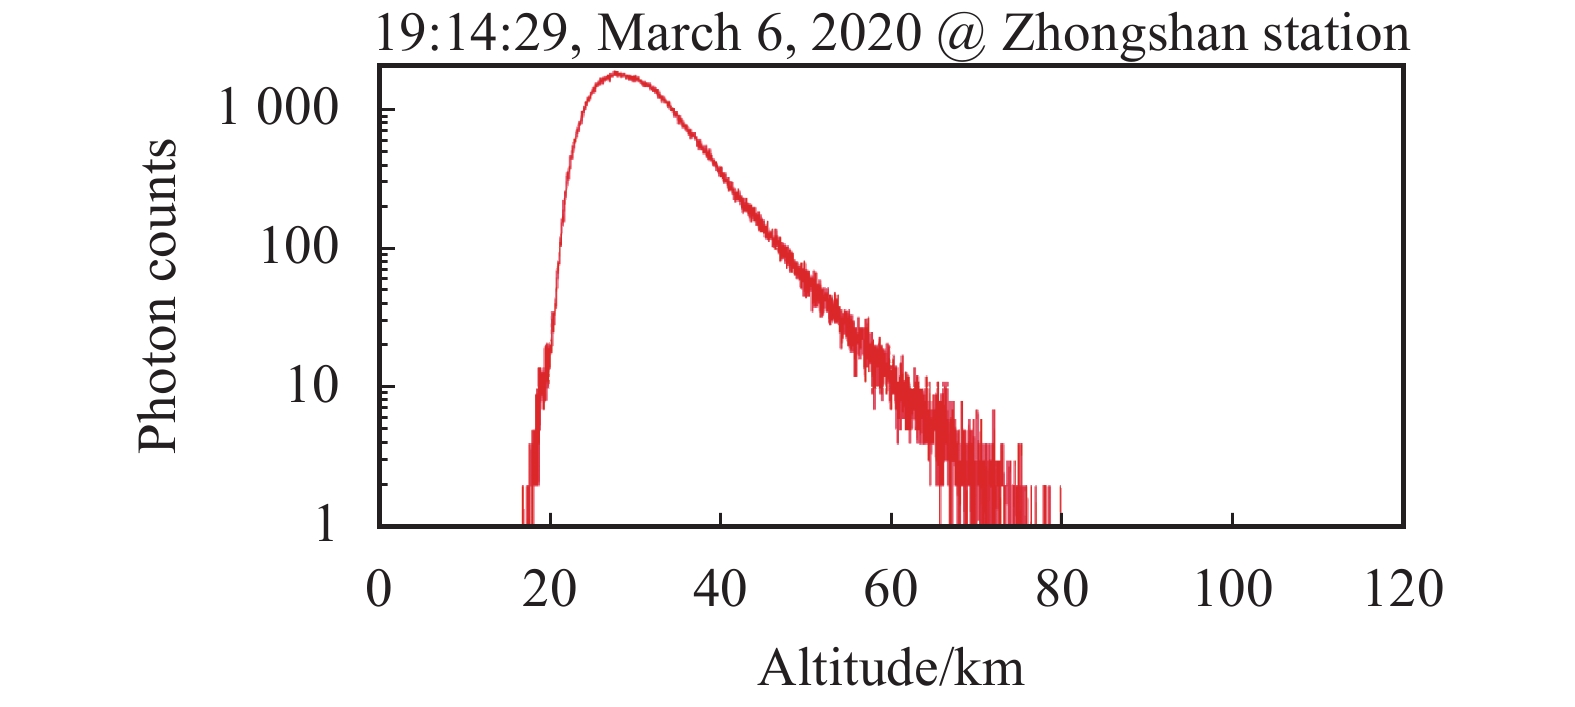 Rayleigh lidar raw signal profile at night on March 6, 2020, at Zhongshan station. The raw data has a vertical bin width of 30 m and an integration time of 1 min